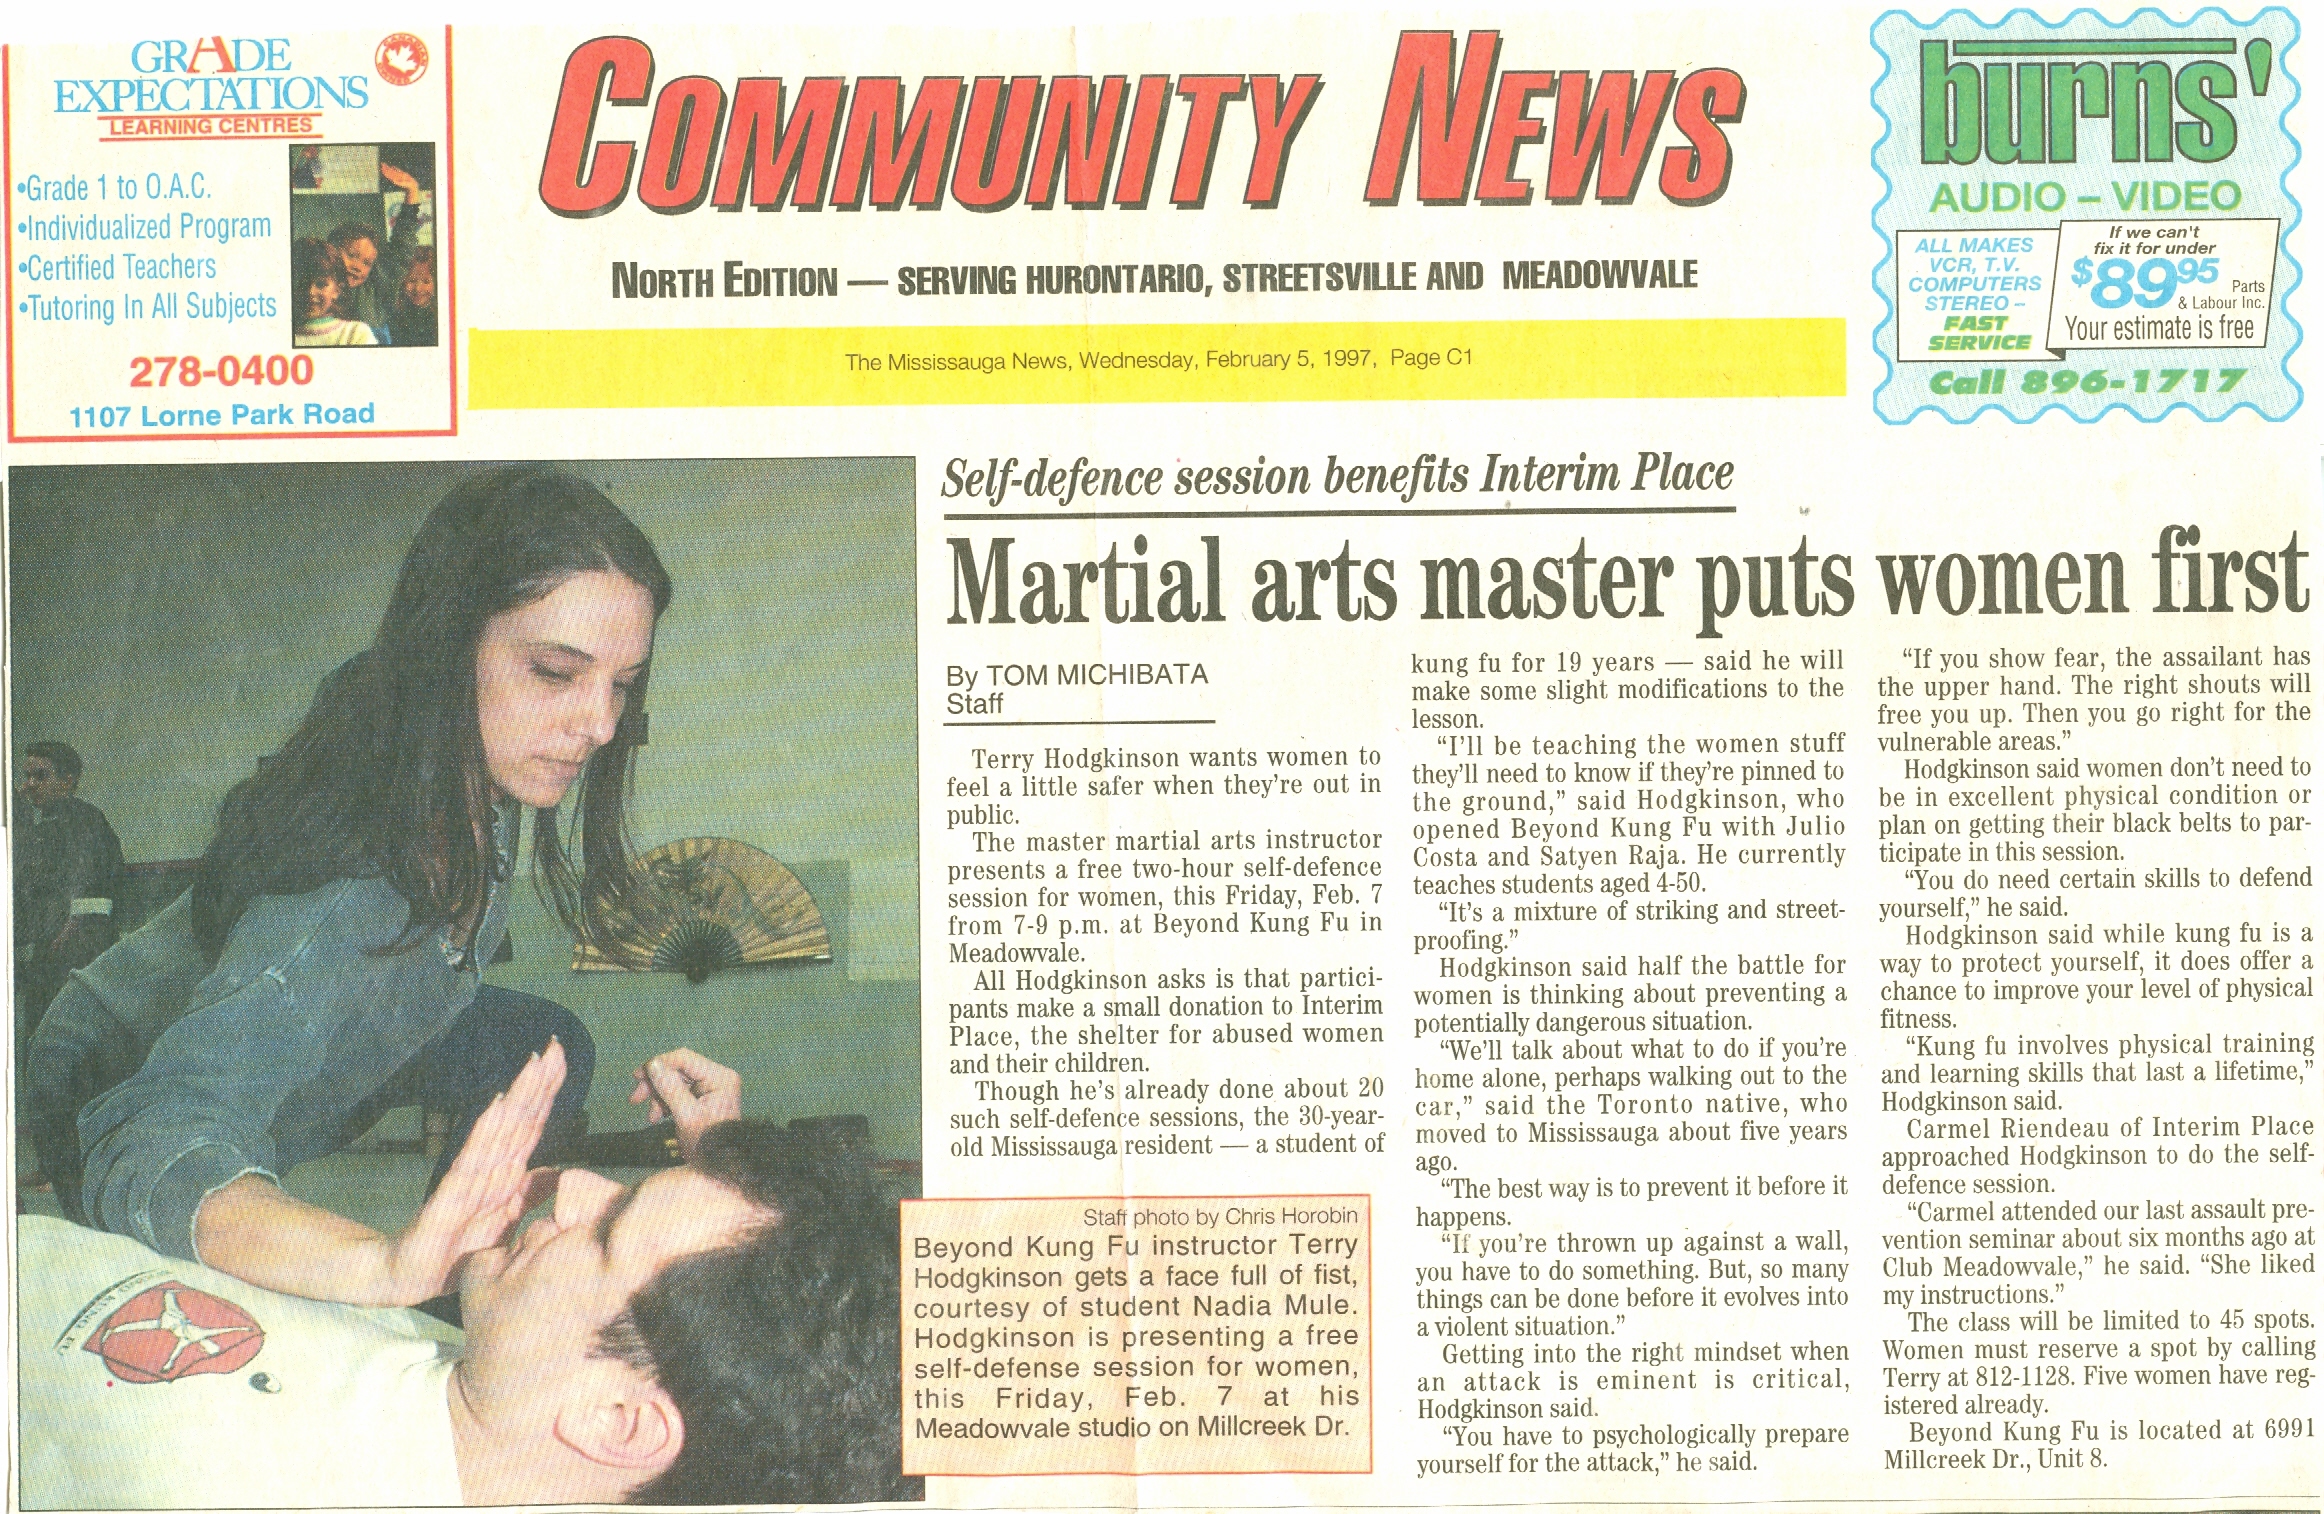 Terry Hodgkinson's women's self defence training in the newspaper 